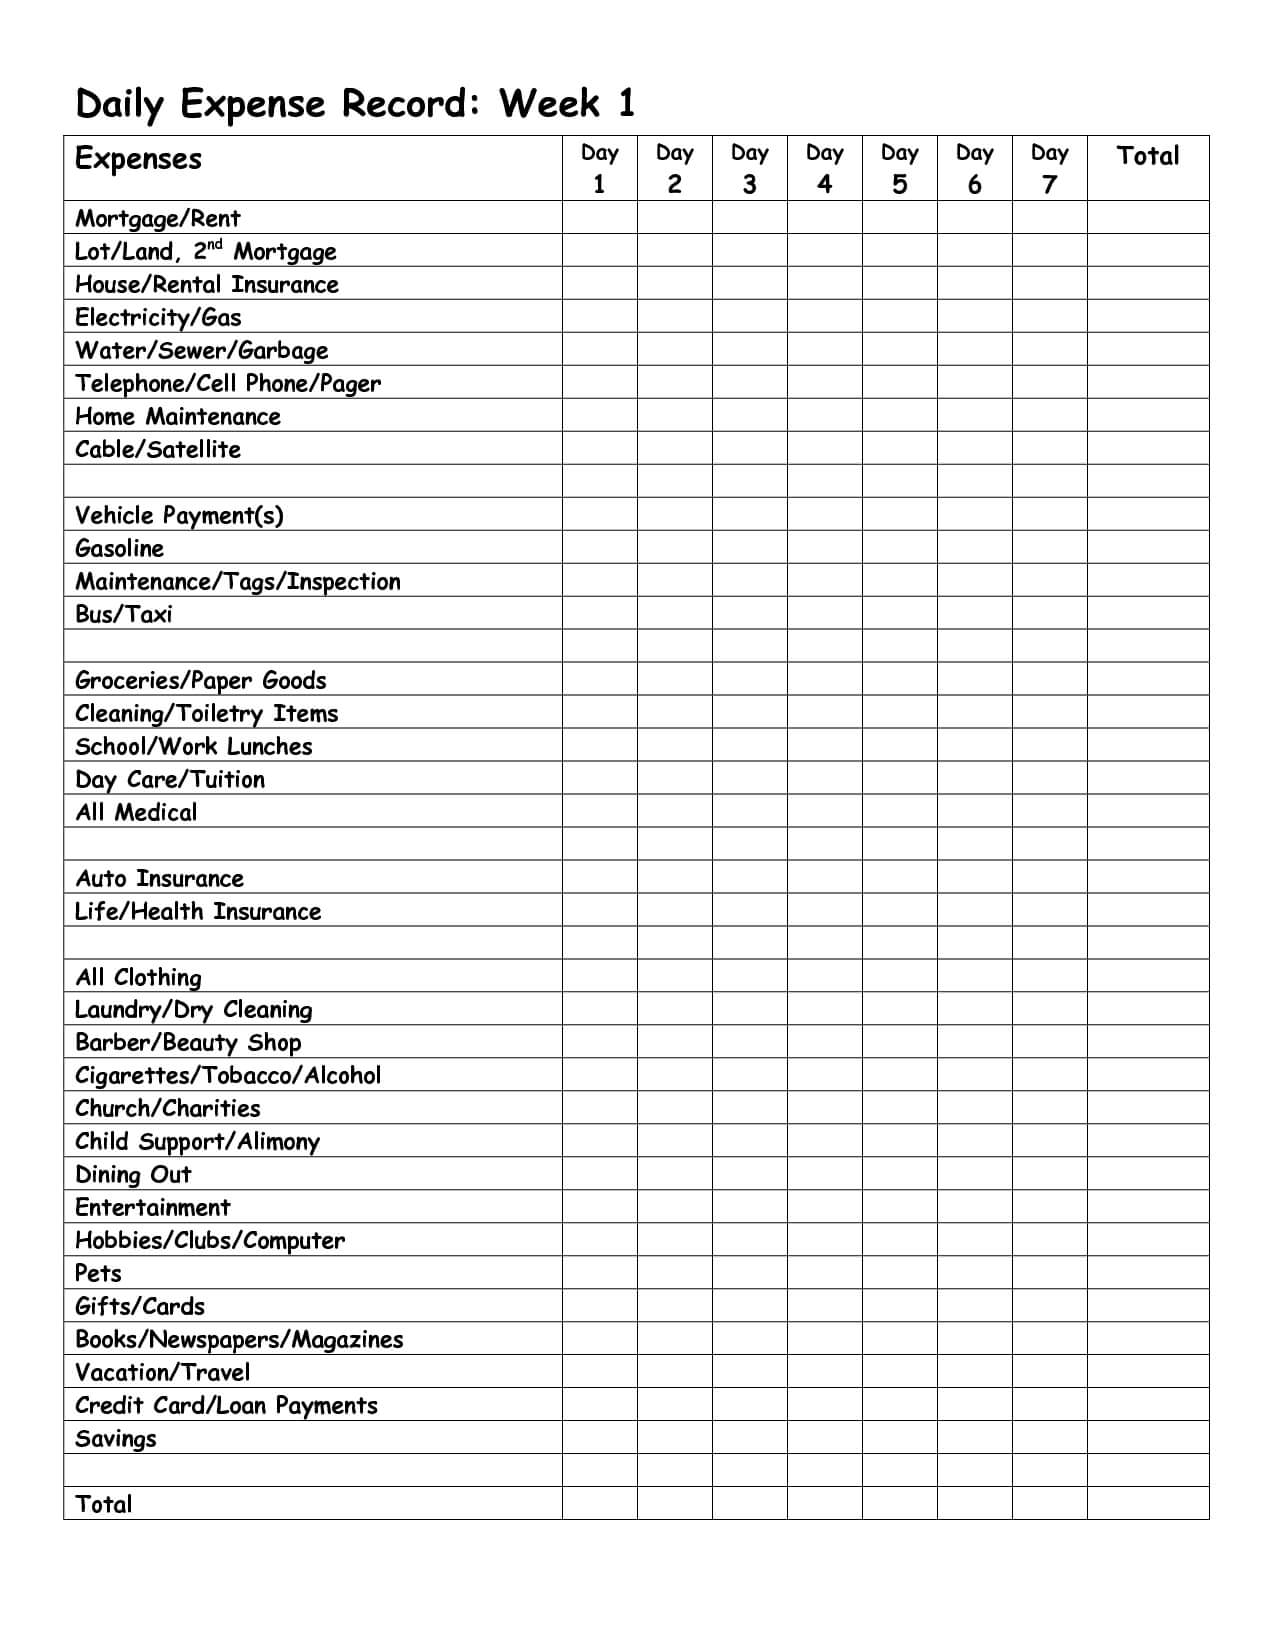 Monthly Expense Report Template | Daily Expense Record Week For Daily Report Sheet Template